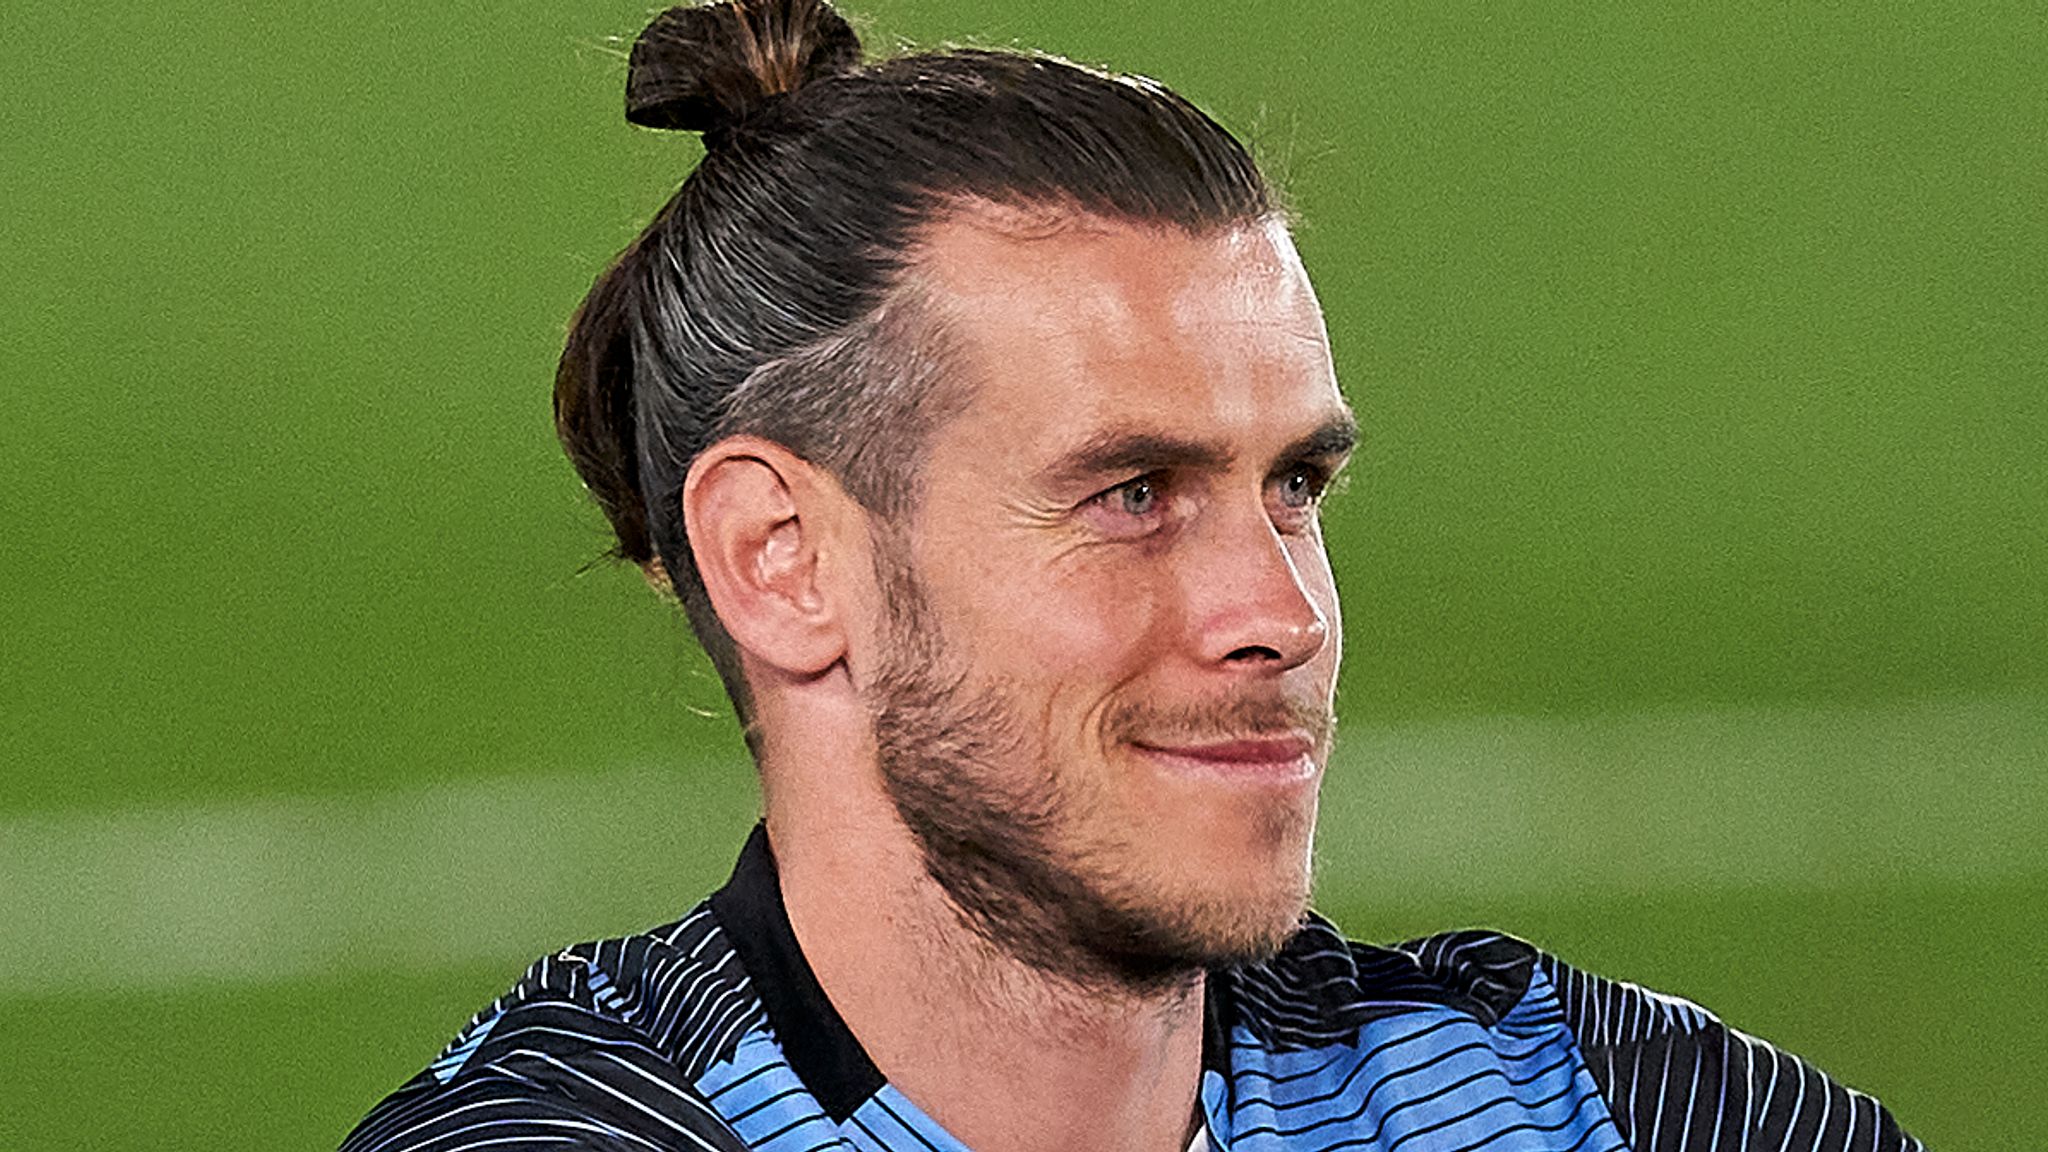 Bale to Stay With Tottenham Hotspur